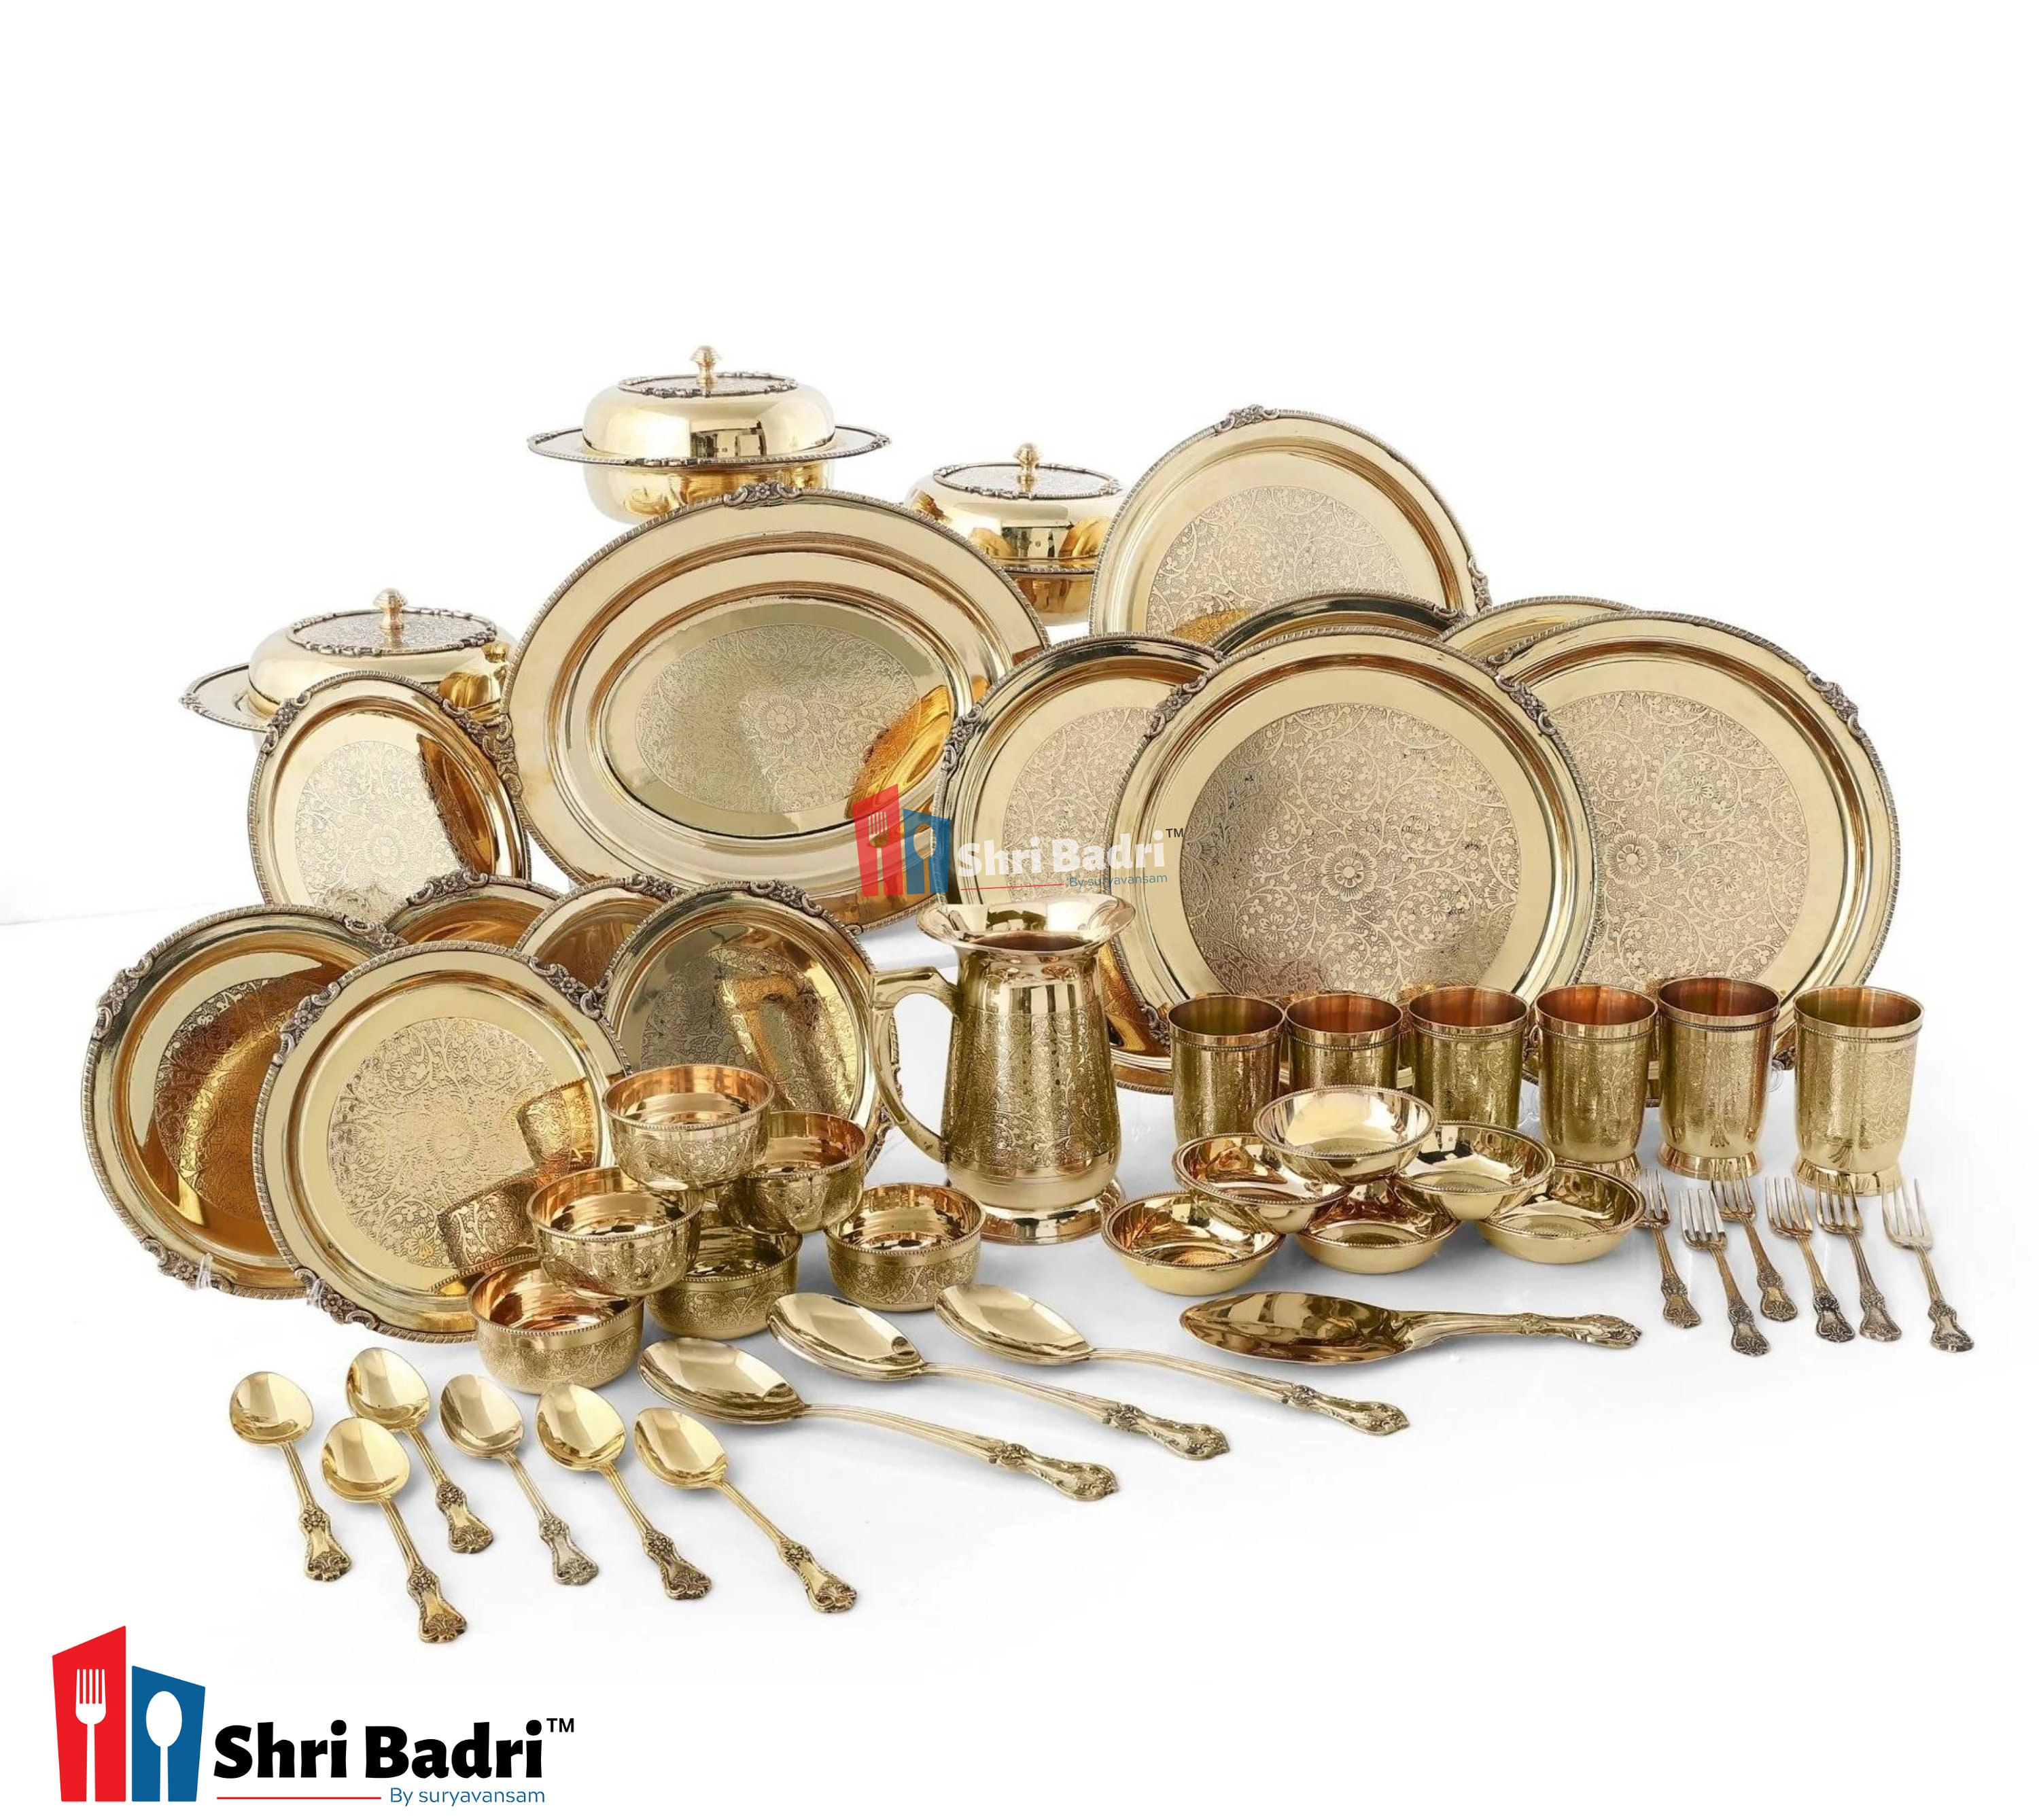 Pure Brass Dinner set Of 51 Pcs With Unique Design Perfect For Full Family  Dinner Set -its look Like Royal Dinner set